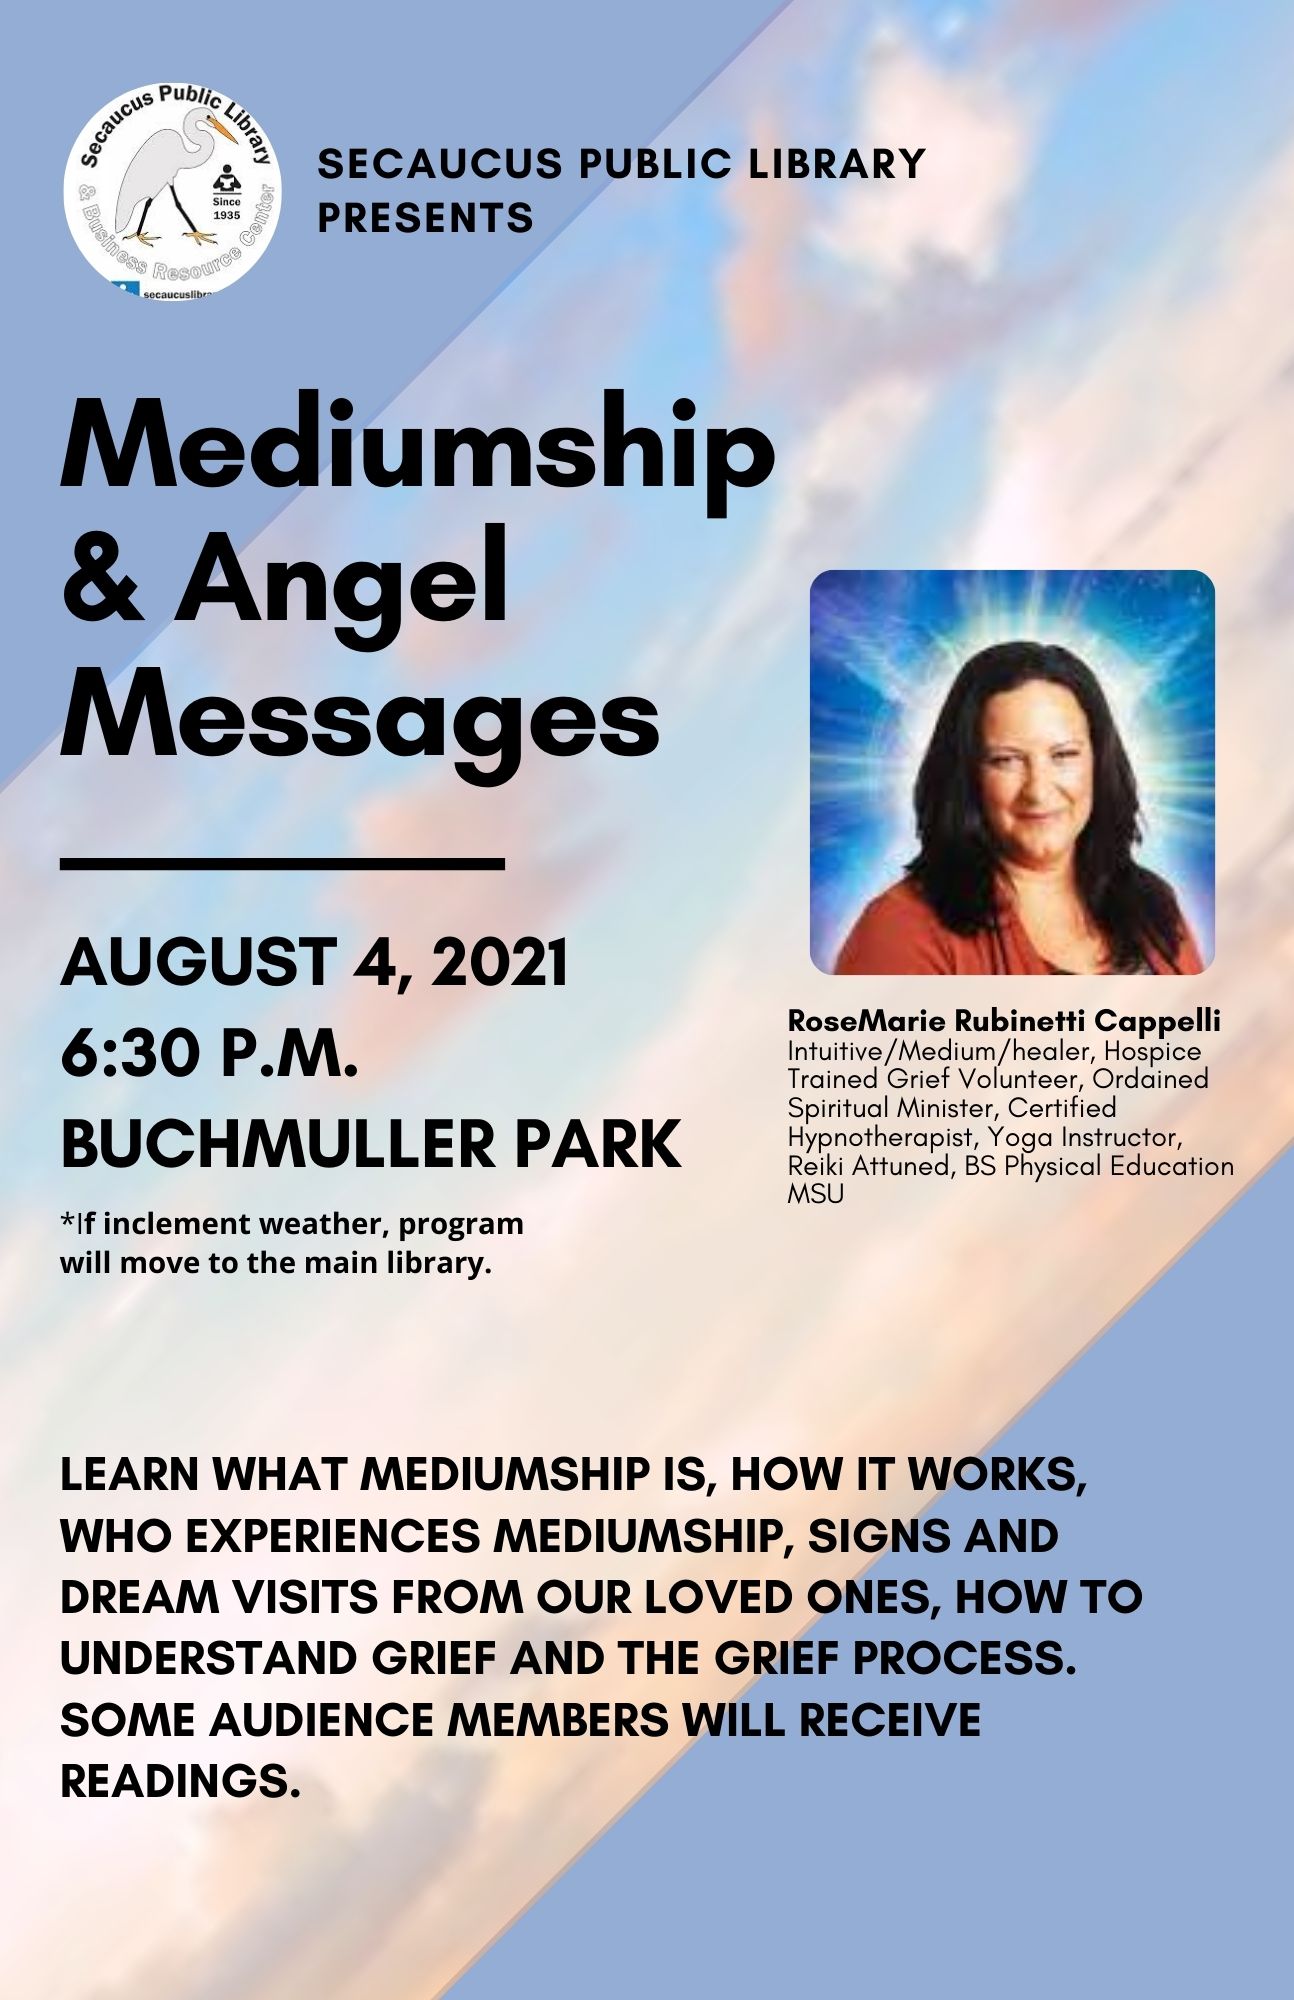 Mediumship and Angel Messages Event Flyer